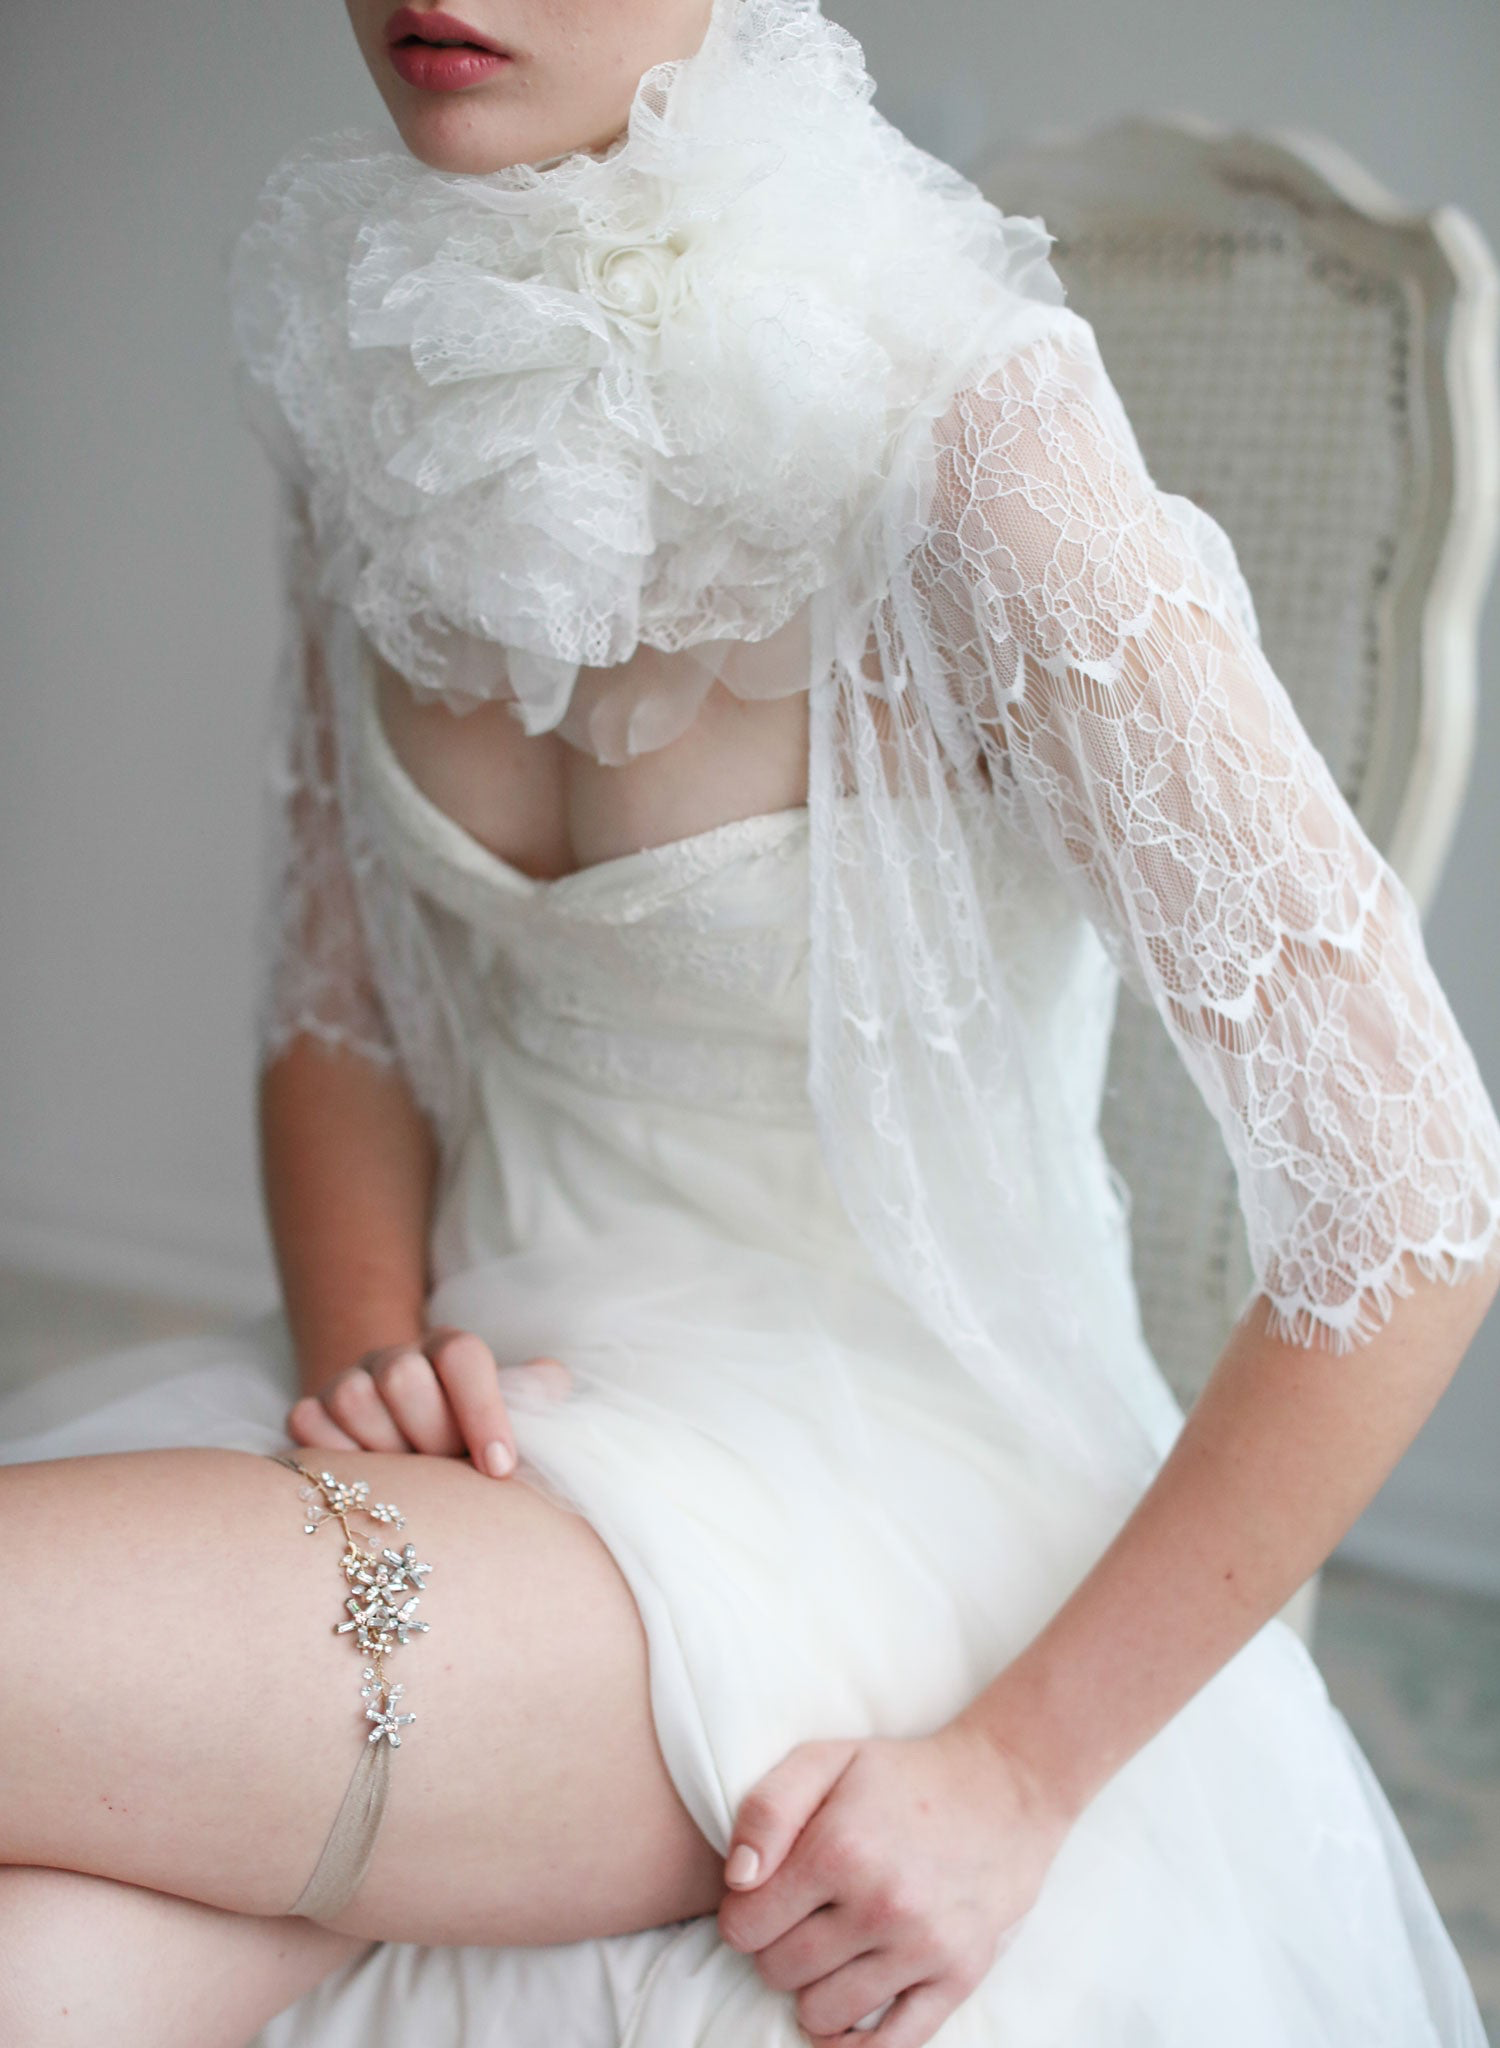 White girdle put on a leg of a bride shortly before the wedding